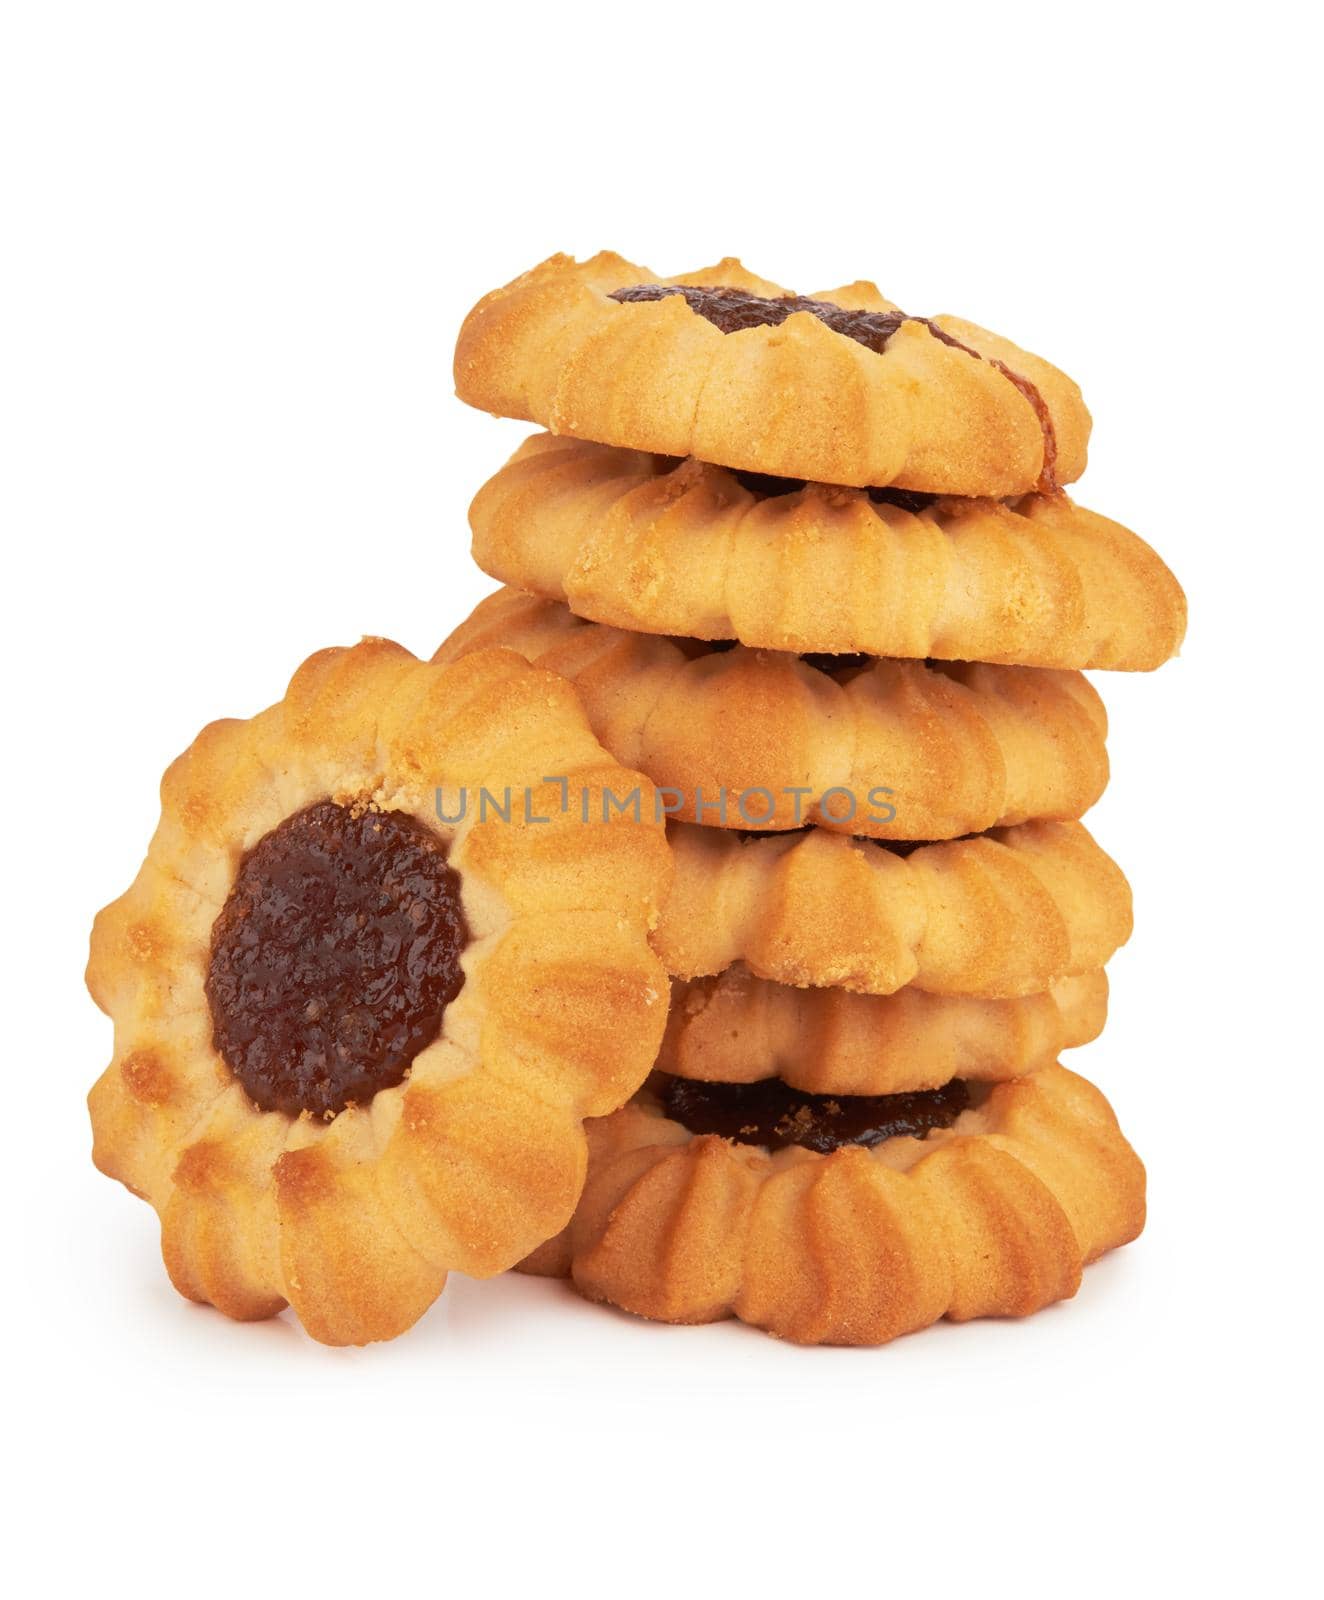 Jam ring biscuit by pioneer111